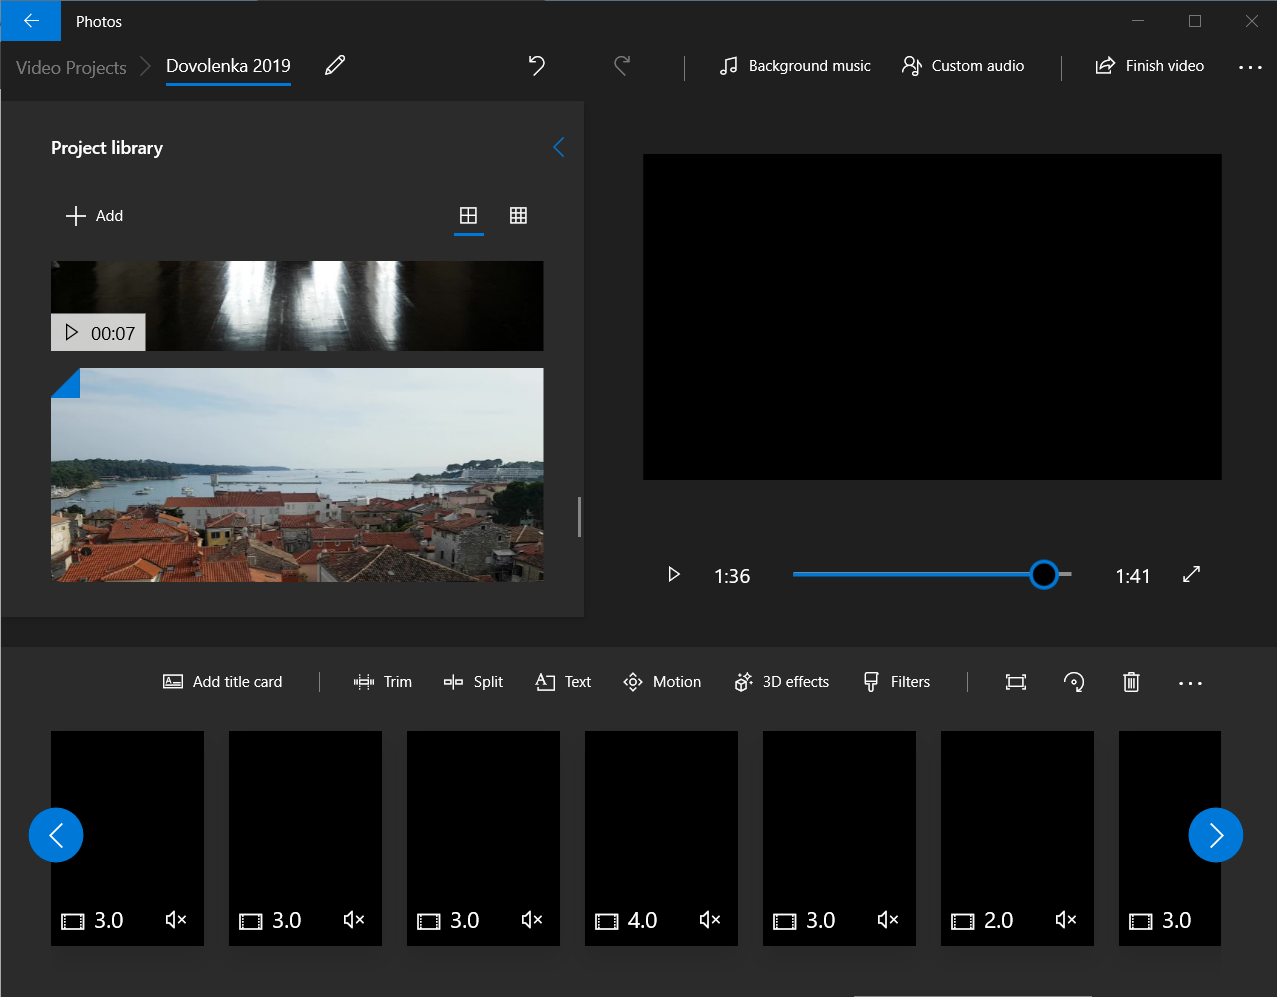  Video  Editor  in Windows  10  stopped working after few 